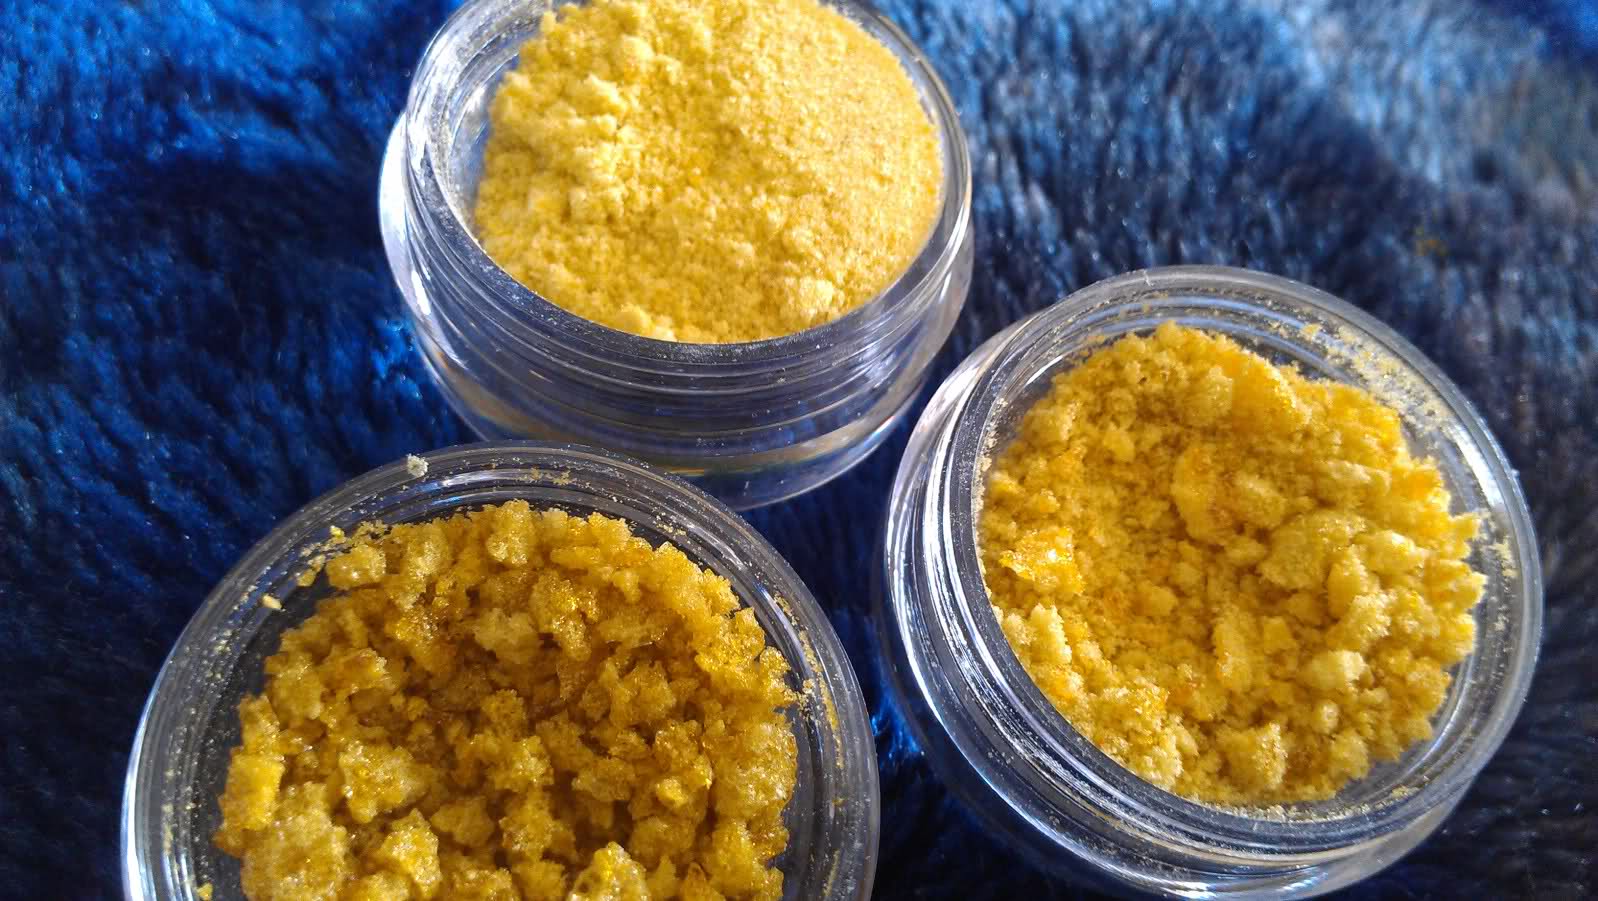 It Product Concentrated Thc Oil Called Dabs